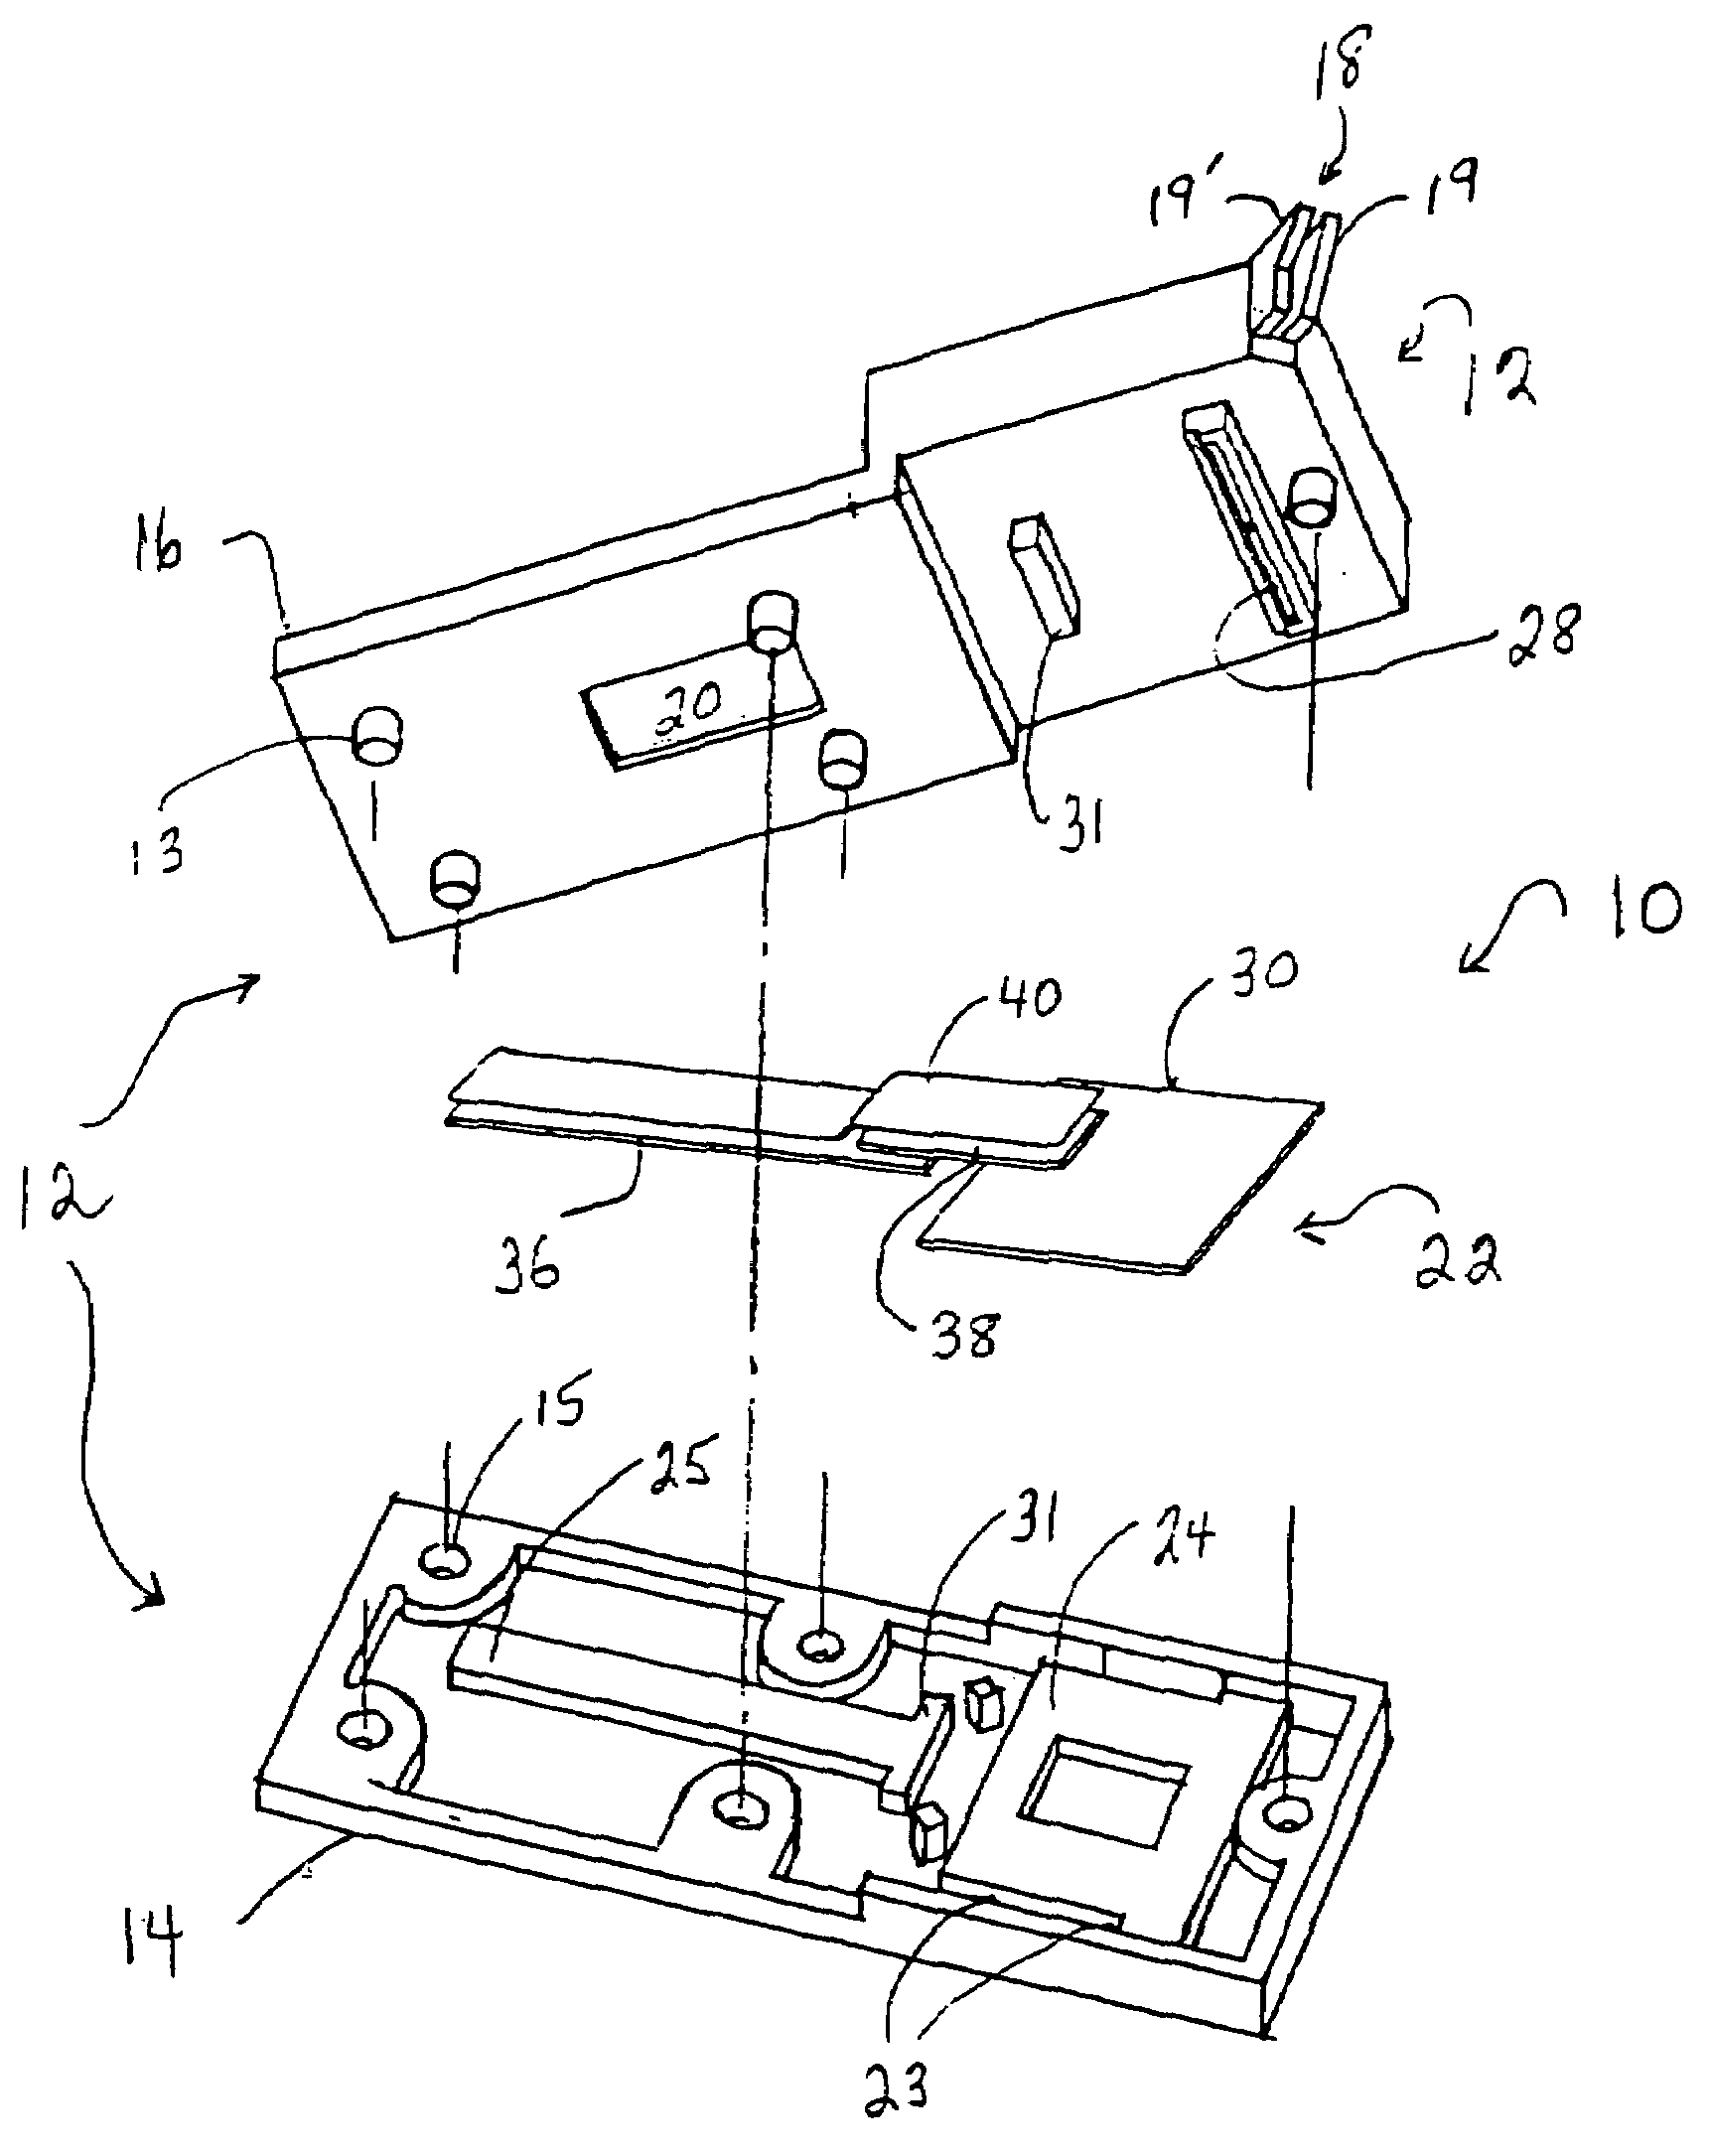 Diagnostic device for analyte detection